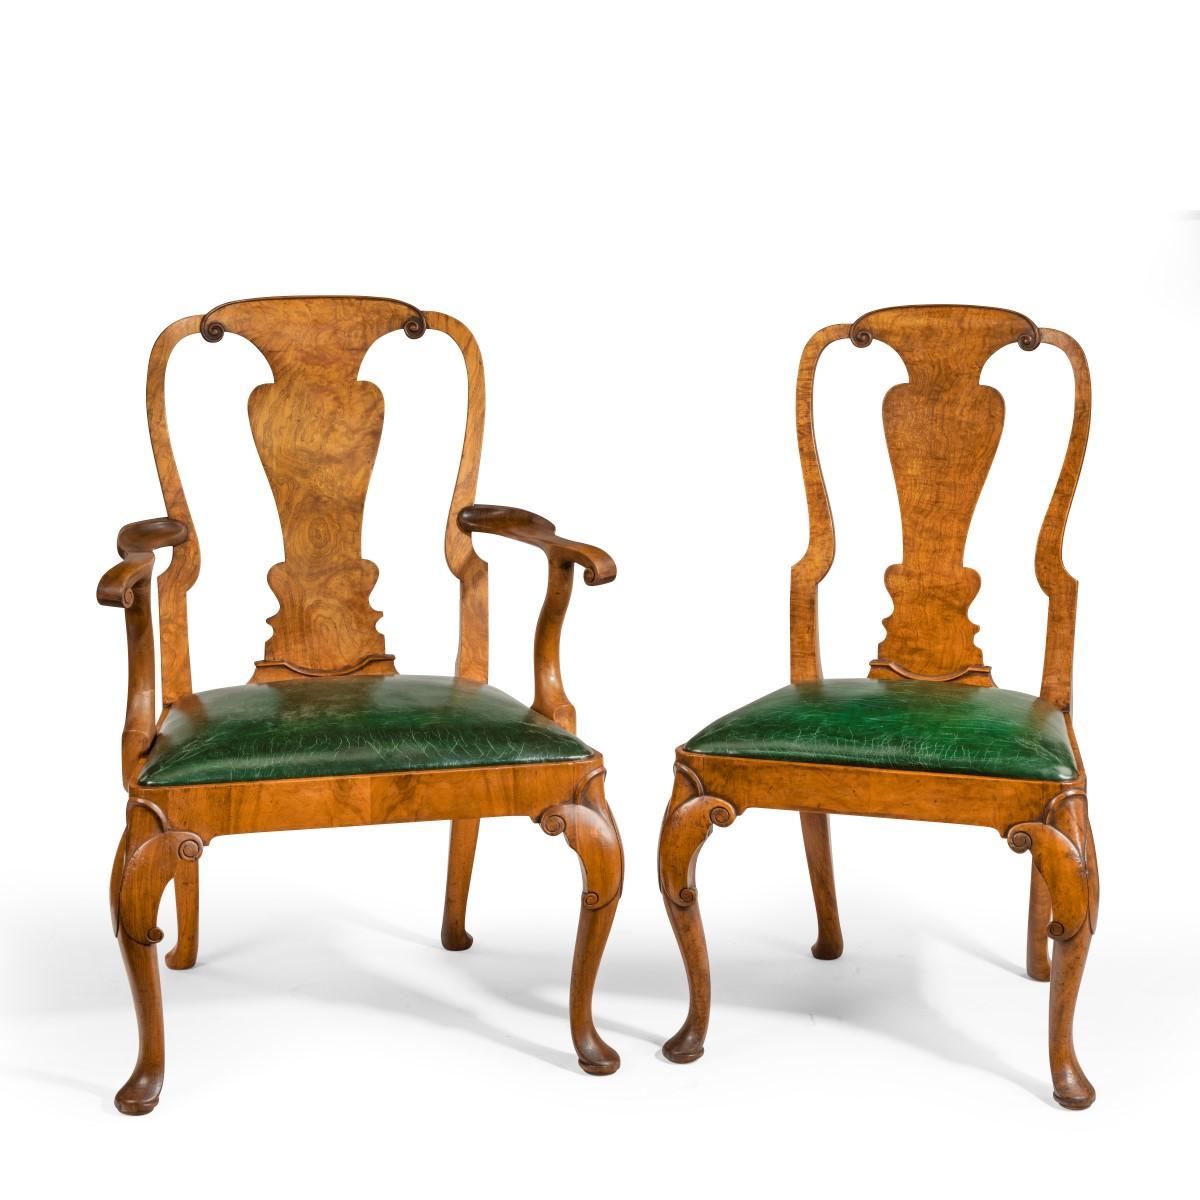 Fine set of eight Queen Anne style walnut and figured elm vase splat dining chairs, comprising two carvers and six side chairs, the backs with well-chosen figured elm splats above generous drop in seats, cabriole front legs, English, circa